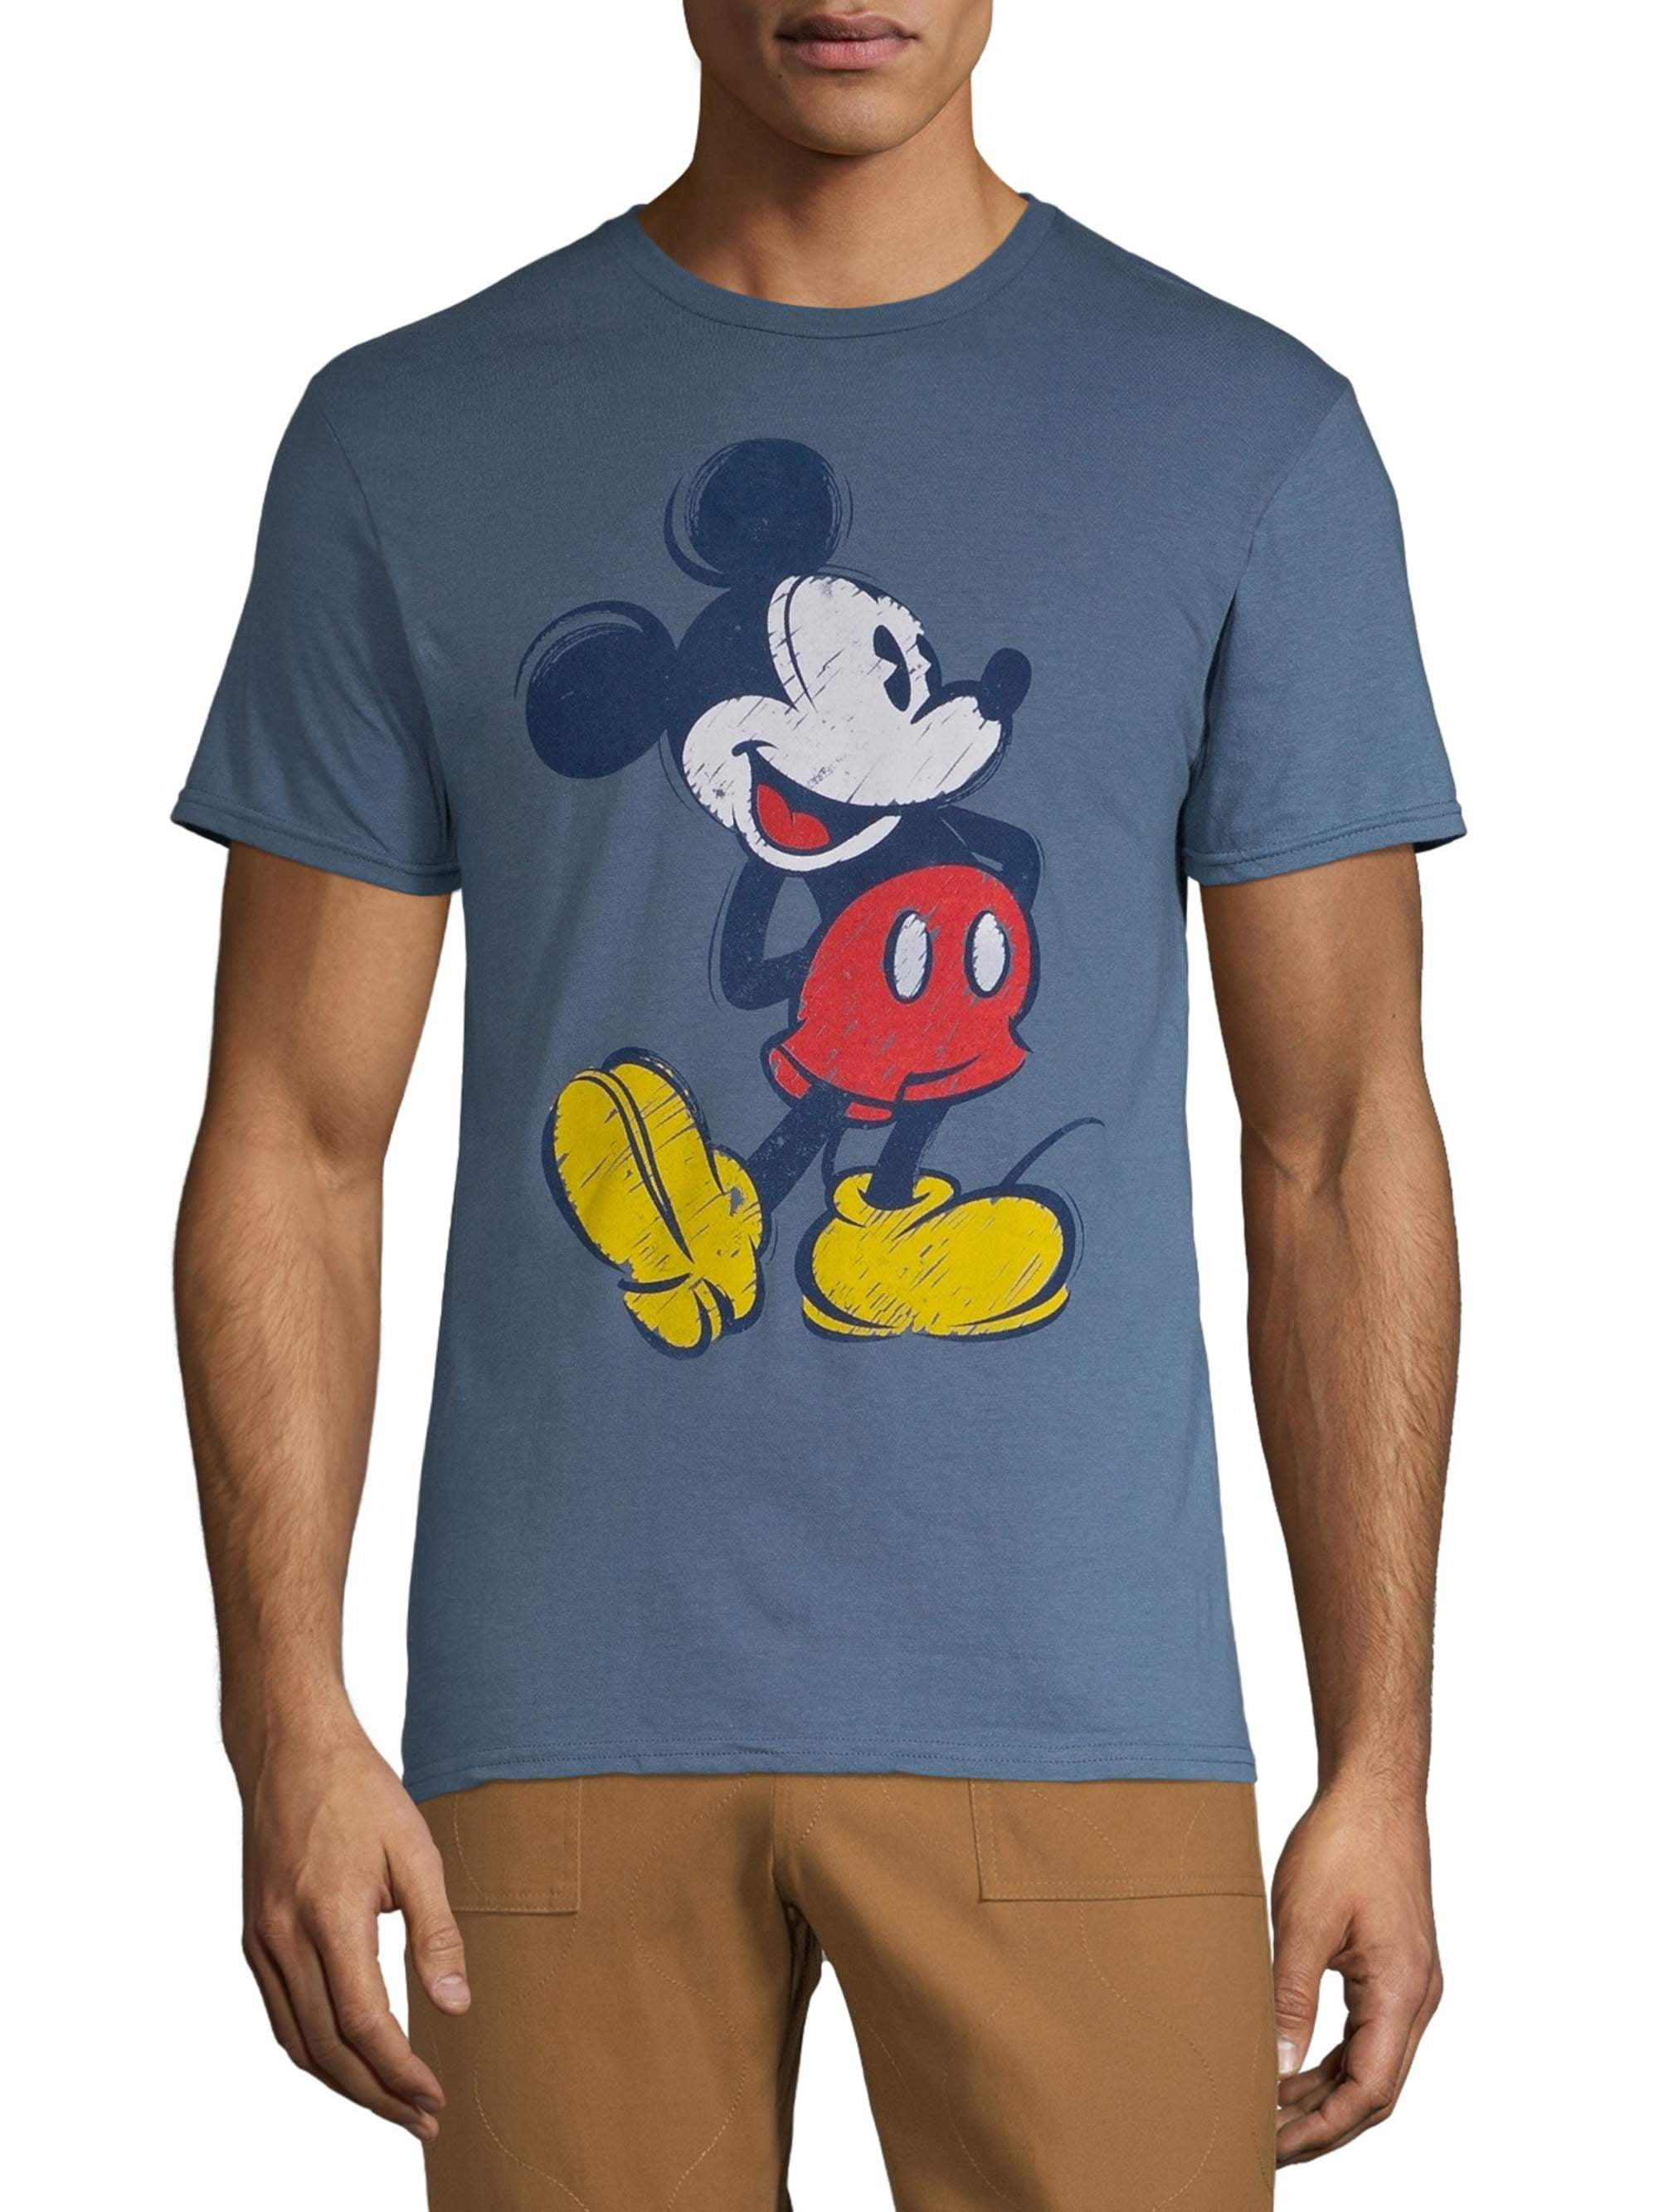 ***** GREAT DISNEY SOCCER  MICKEY MOUSE PERSONALIZED T-SHIRT IRON ON TRANSFER 